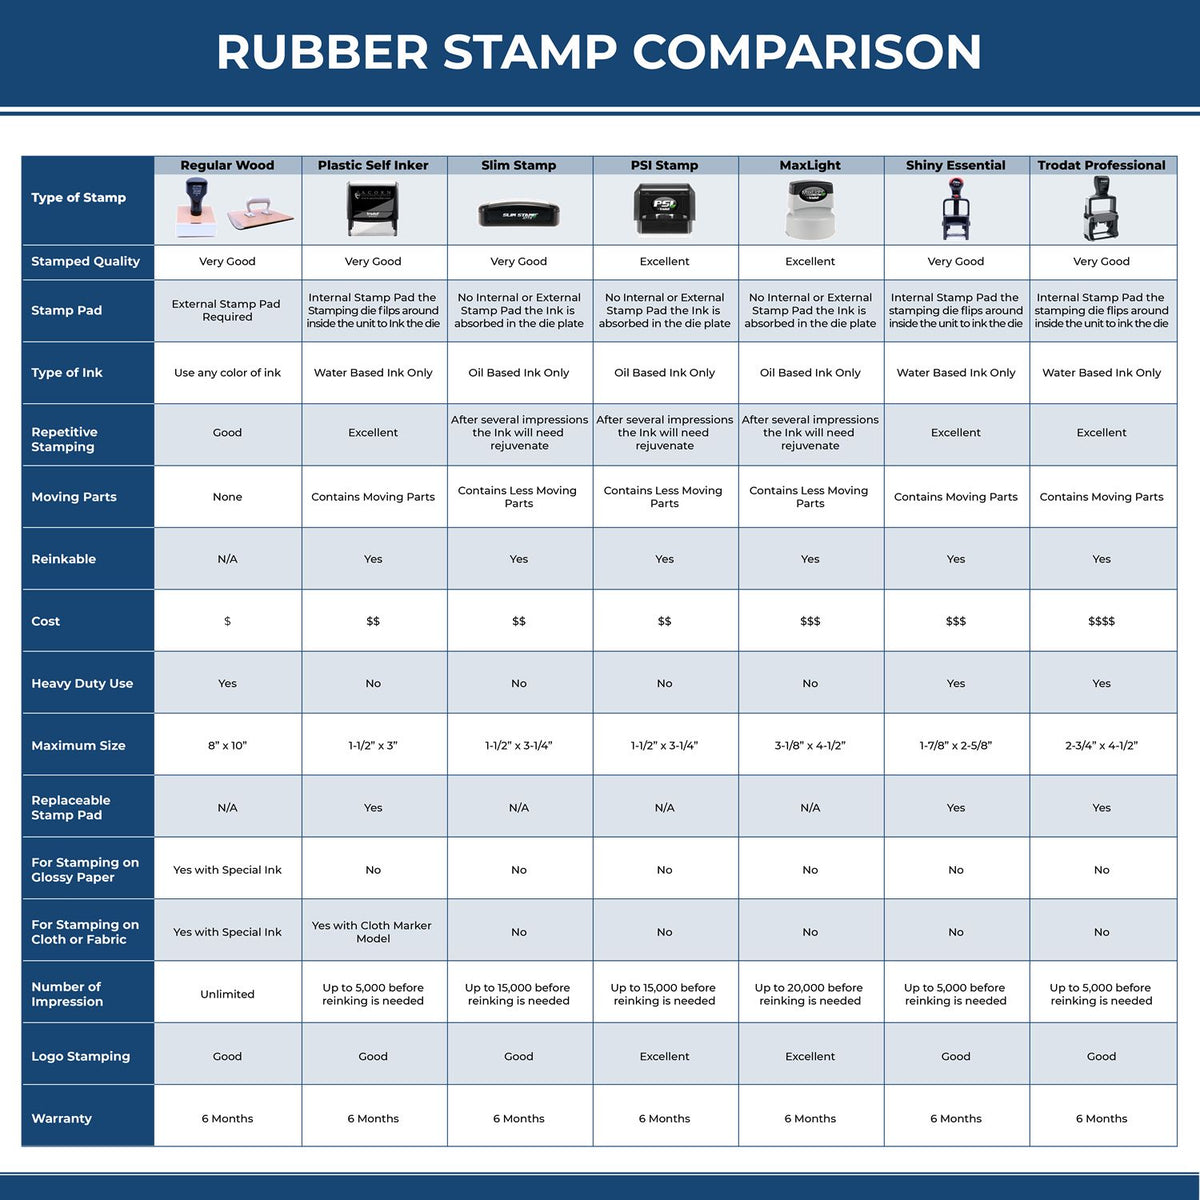 Large Pre-Inked Review and Sign Stamp 5604SLIM Rubber Stamp Comparison